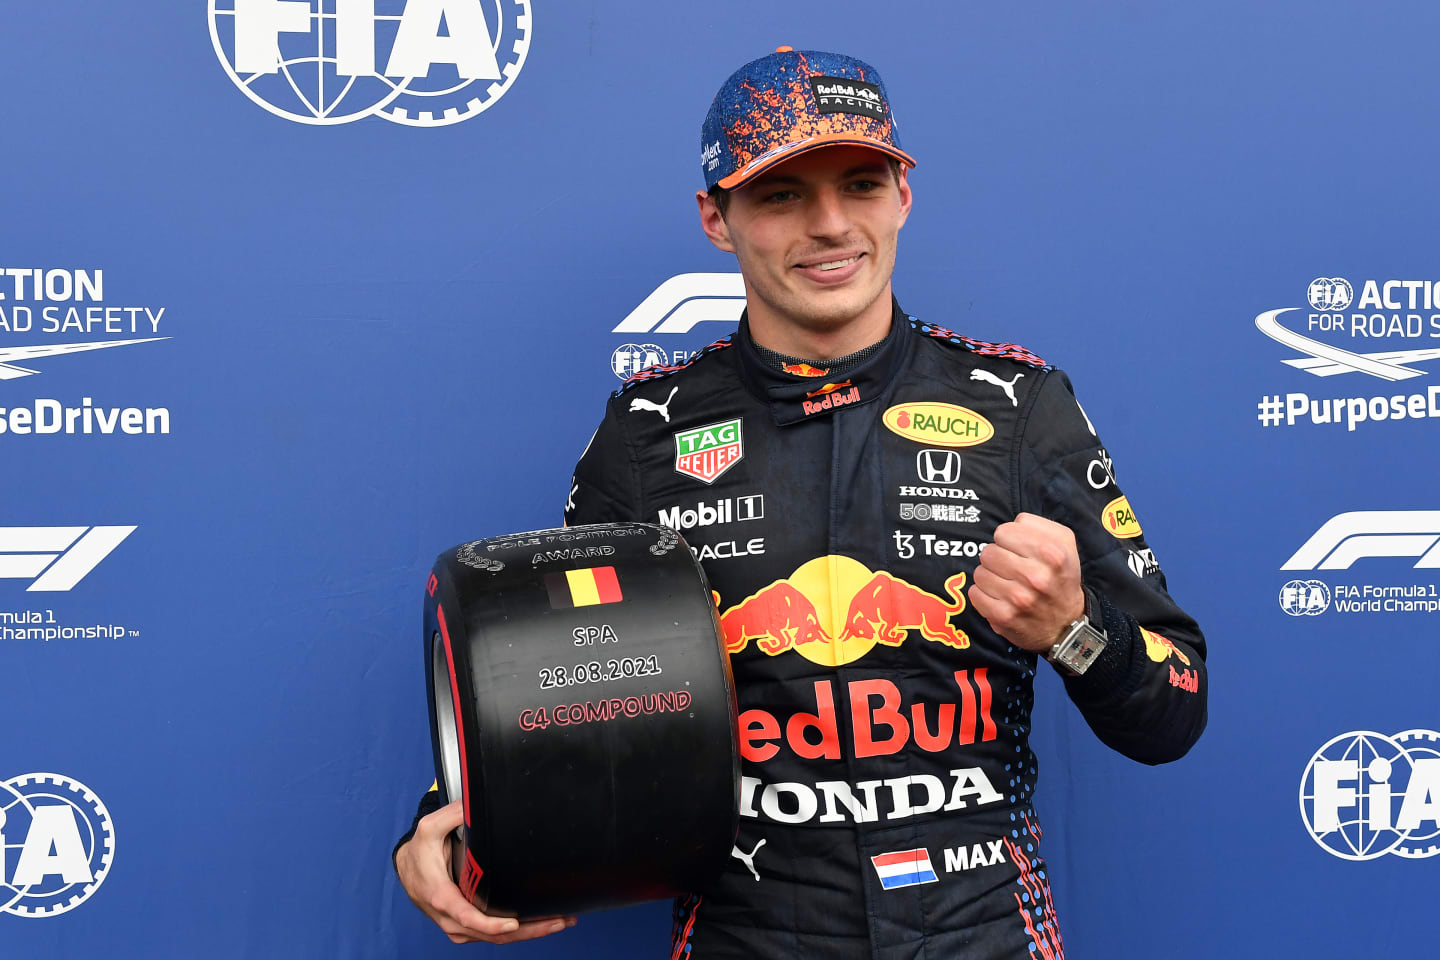 SPA, BELGIUM - AUGUST 28: Pole position qualifier Max Verstappen of Netherlands and Red Bull Racing celebrates in parc ferme during qualifying ahead of the F1 Grand Prix of Belgium at Circuit de Spa-Francorchamps on August 28, 2021 in Spa, Belgium. (Photo by John Thys - Pool/Getty Images)